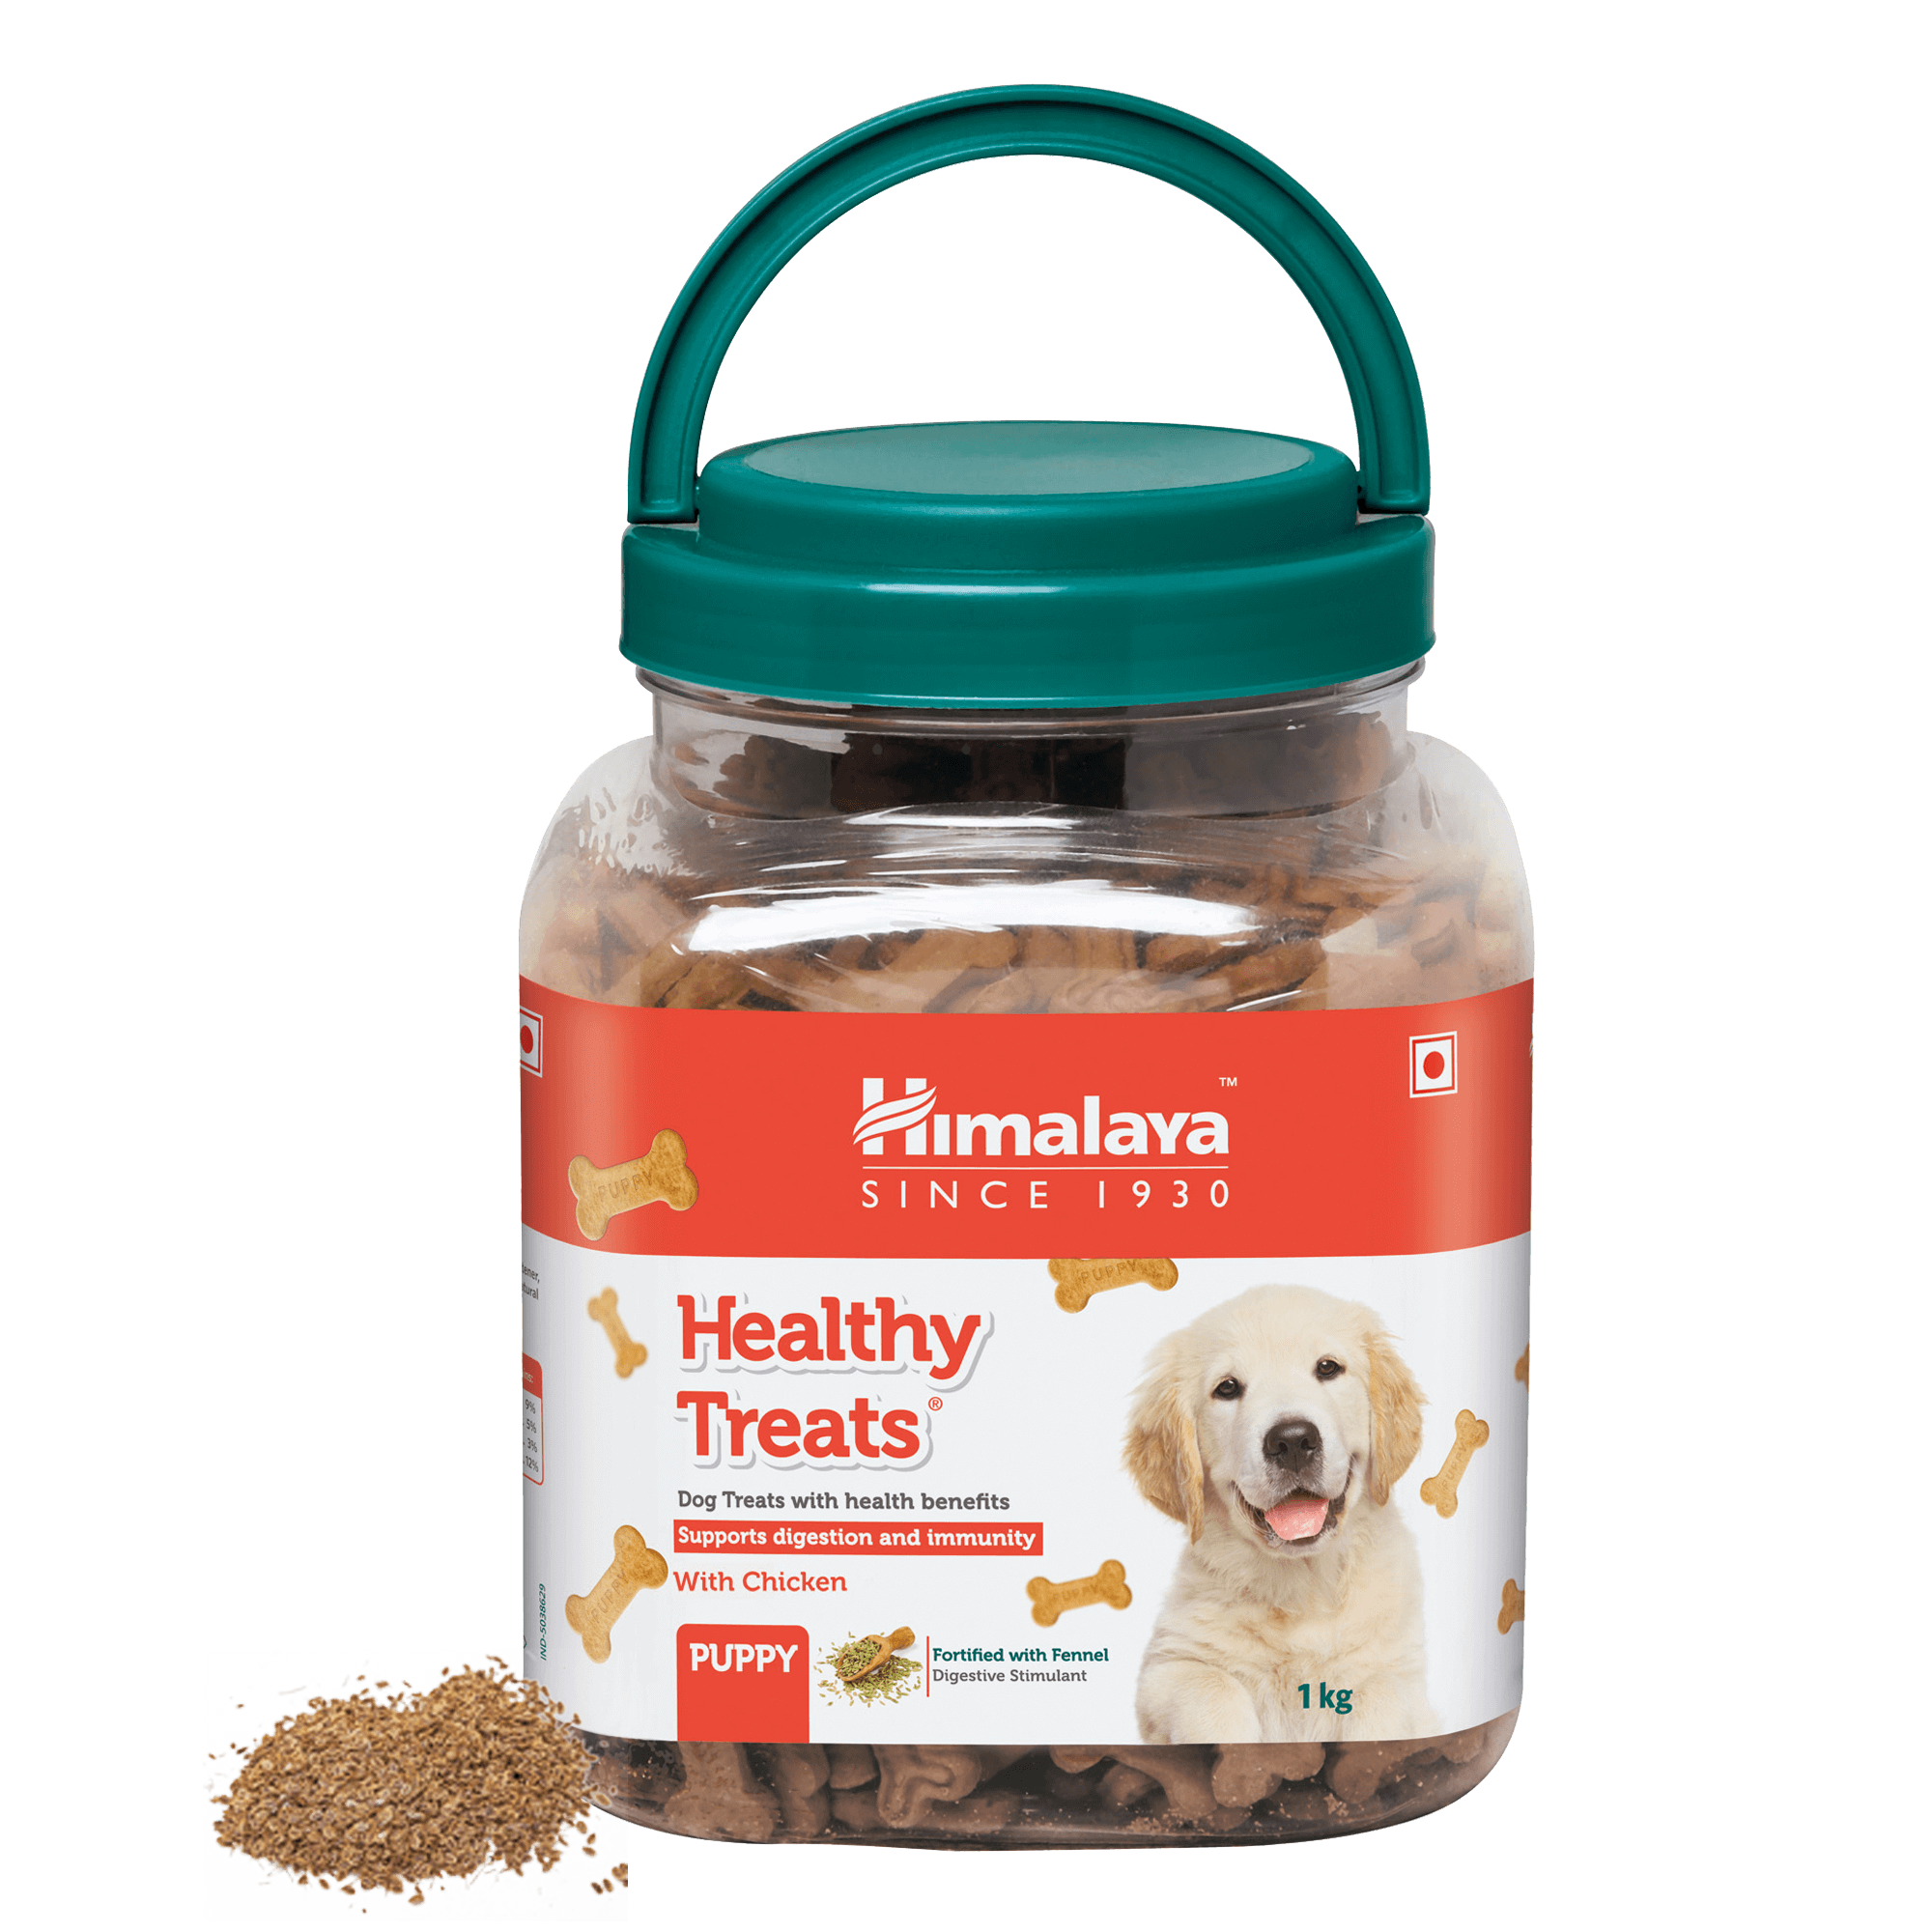 Himalaya Healthy Treats (Puppy) - Promotes Overall Fitness in Puppies